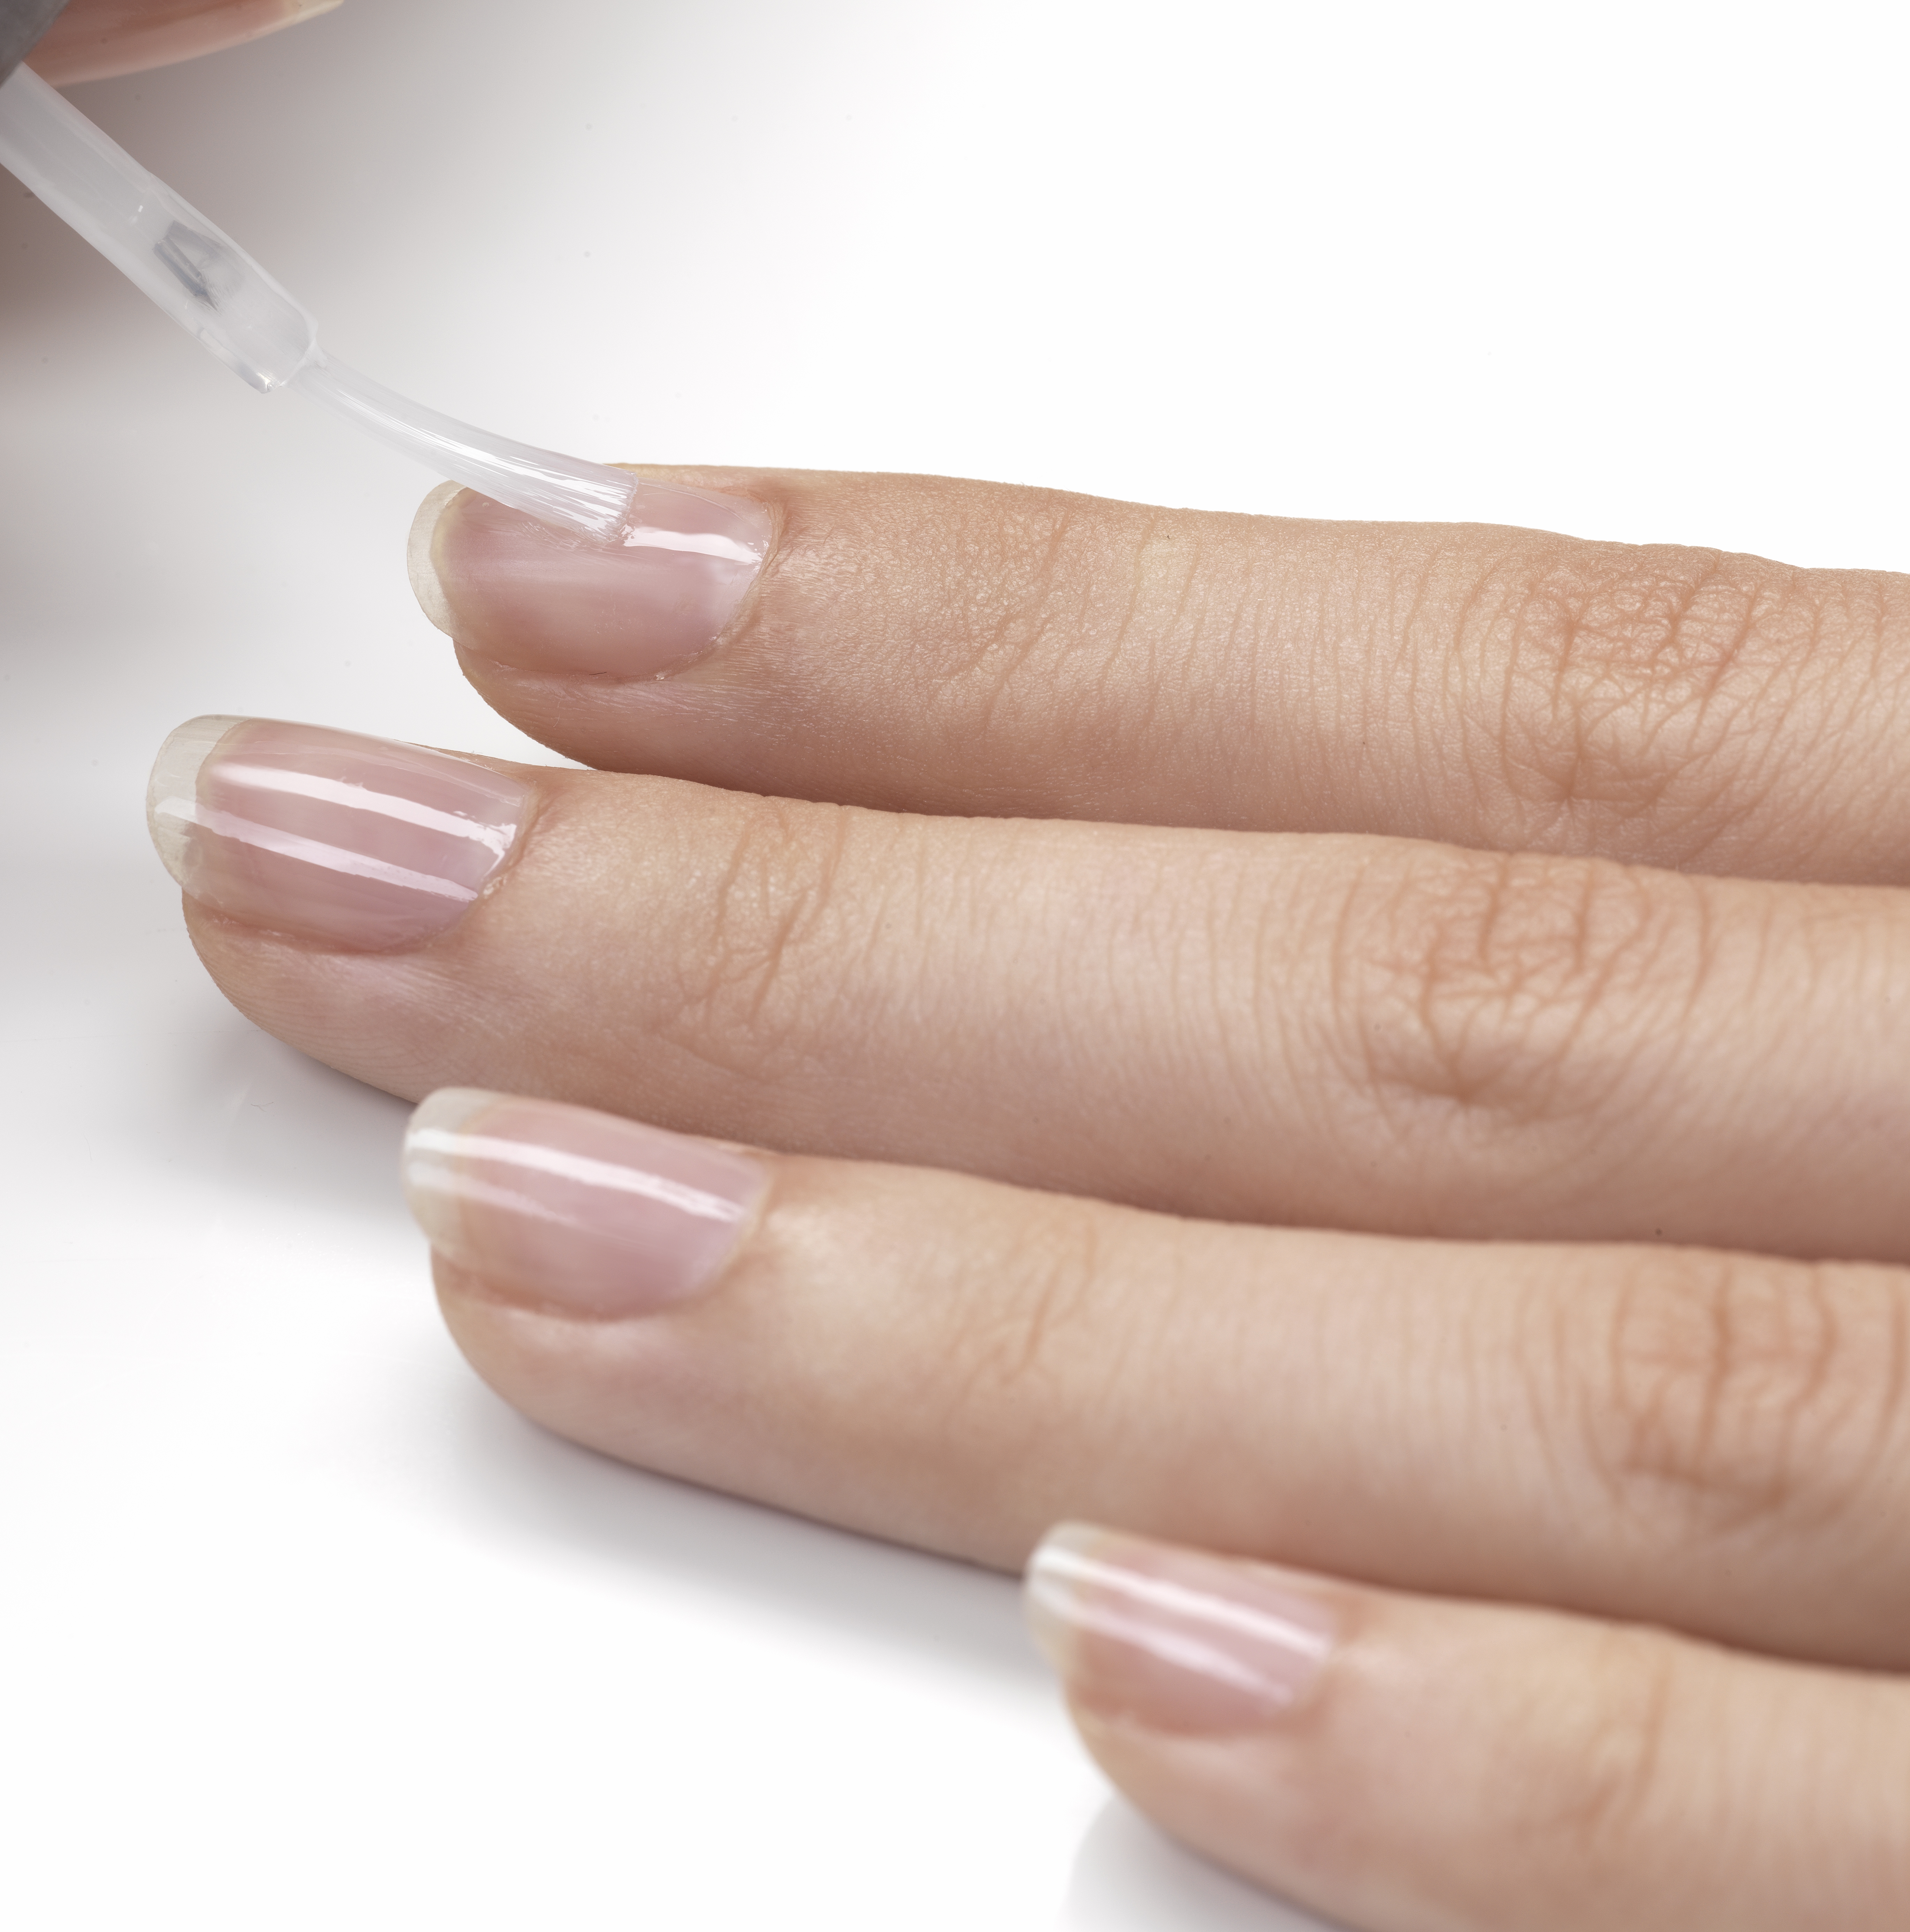 Applying base coat to nails | Source: Getty Images